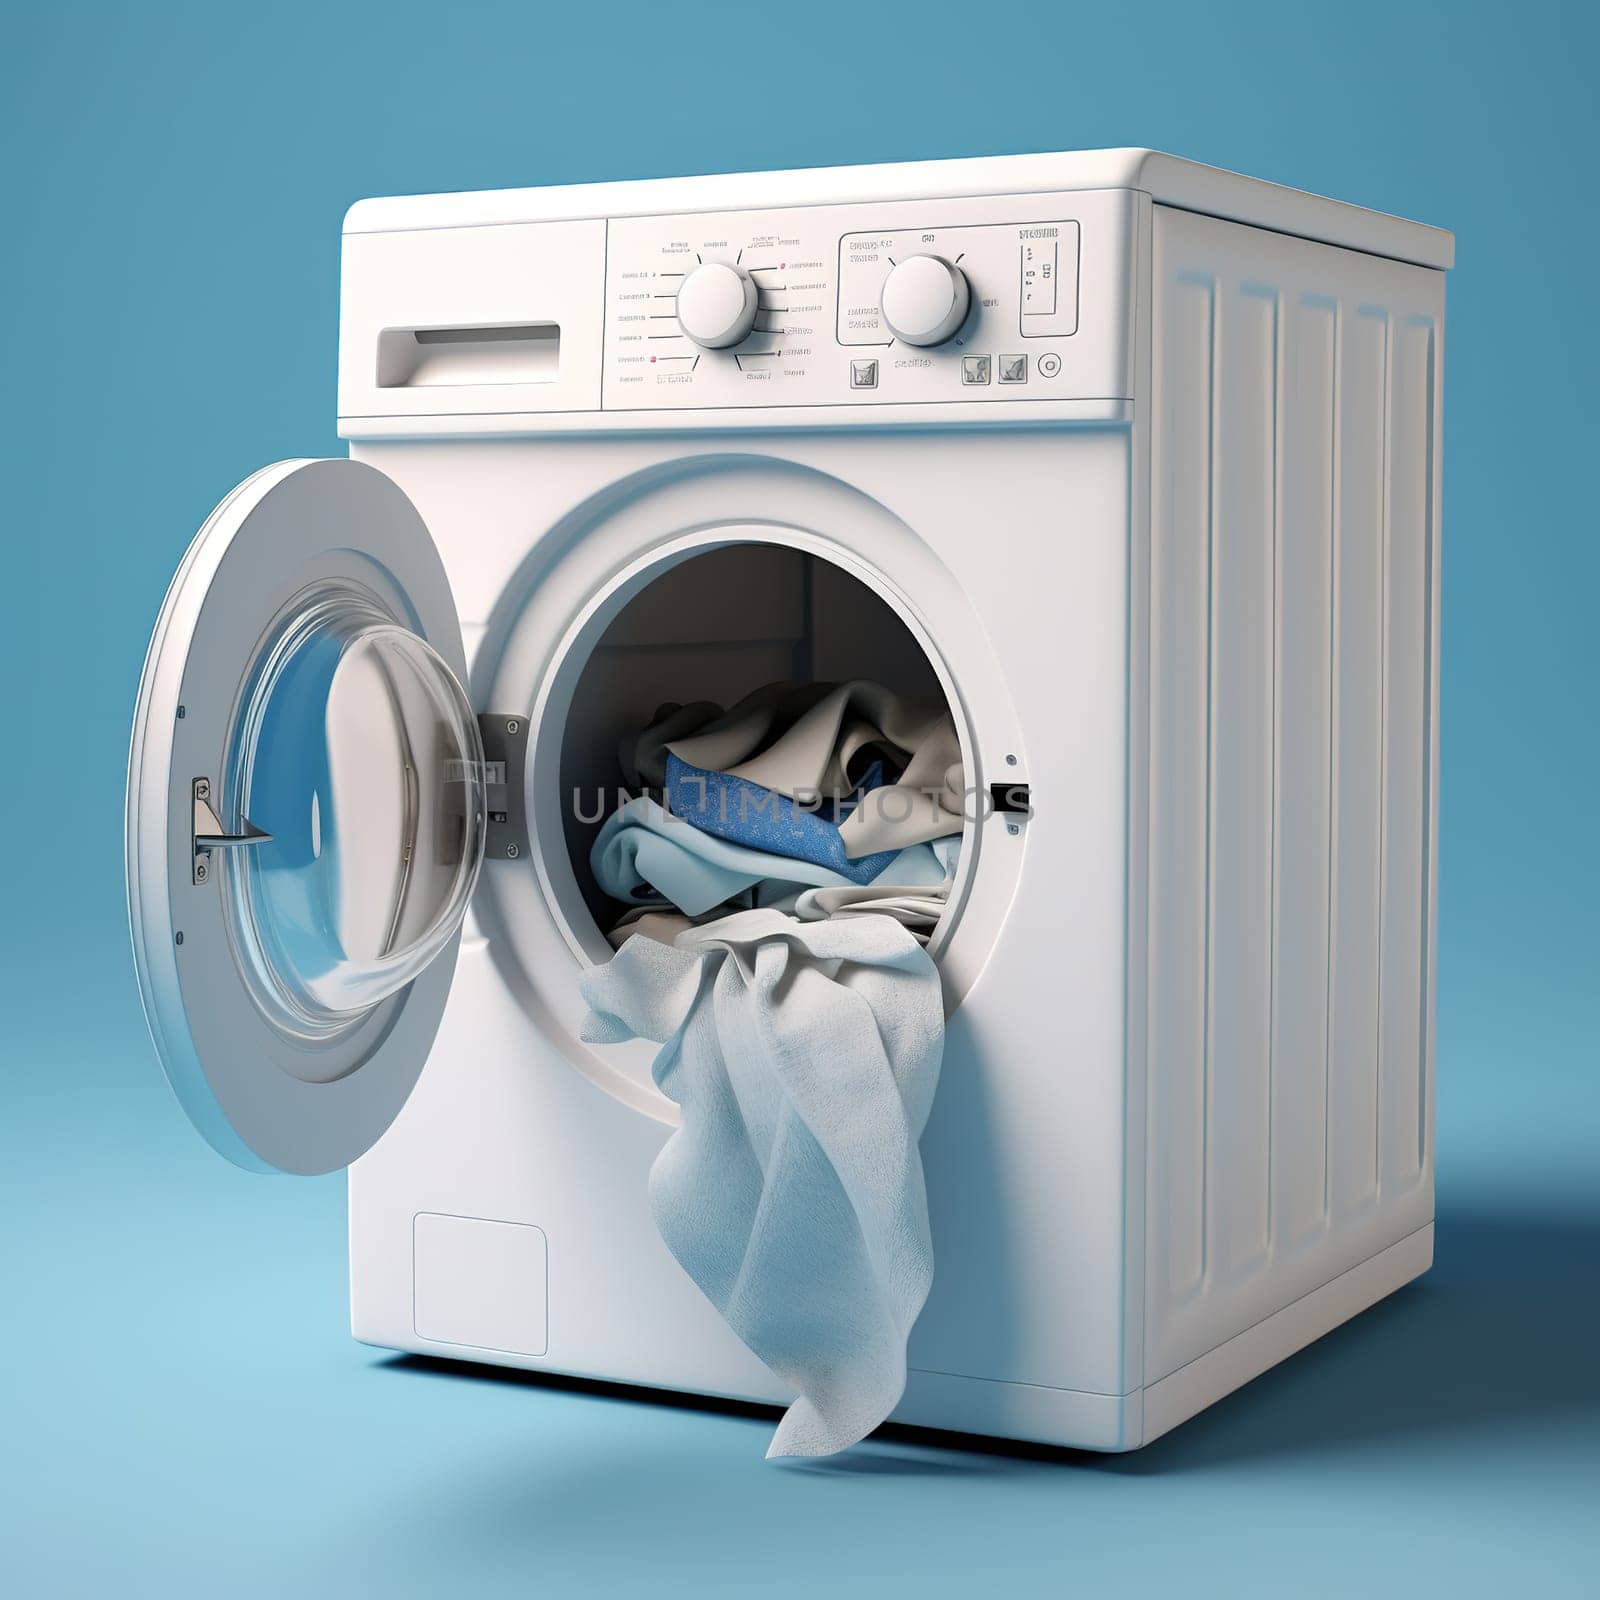 Washing machine with dirty laundry, machine for washing clothes